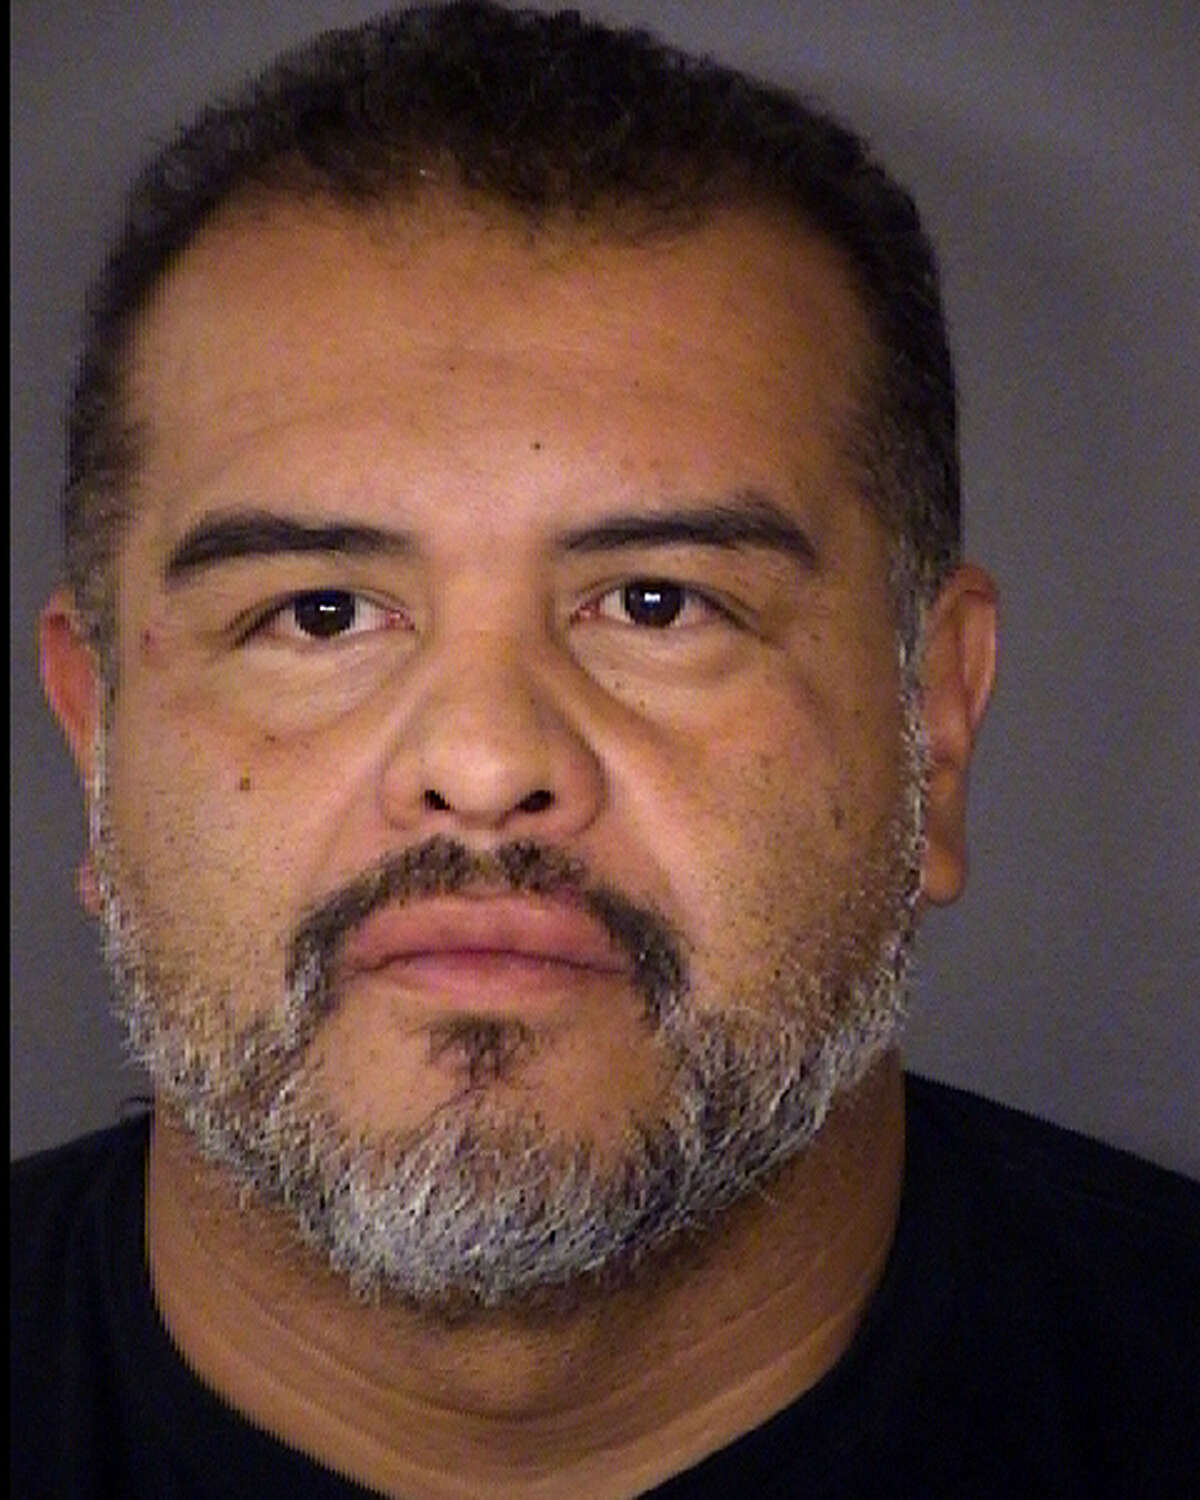 David Angel Esquivel, 47, is accused of starting a fire in a house while eight others were inside.